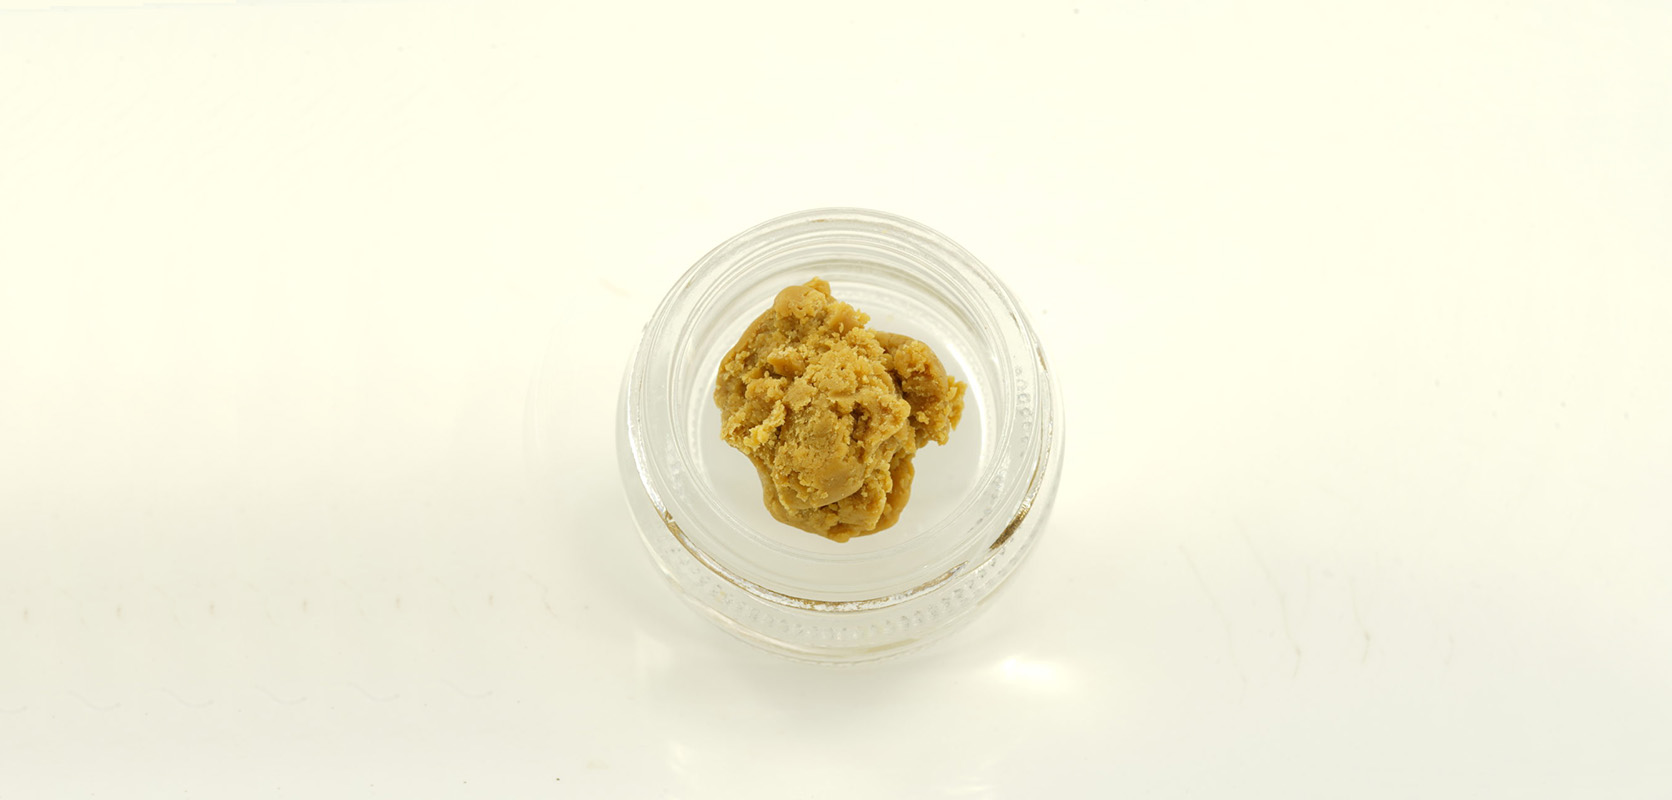 Budder Weed Concentrate from Low Price Bud BC cannabis mail order marijuana dispensary. buy cannabis concentrates online. concentrates canada. dab drug. 